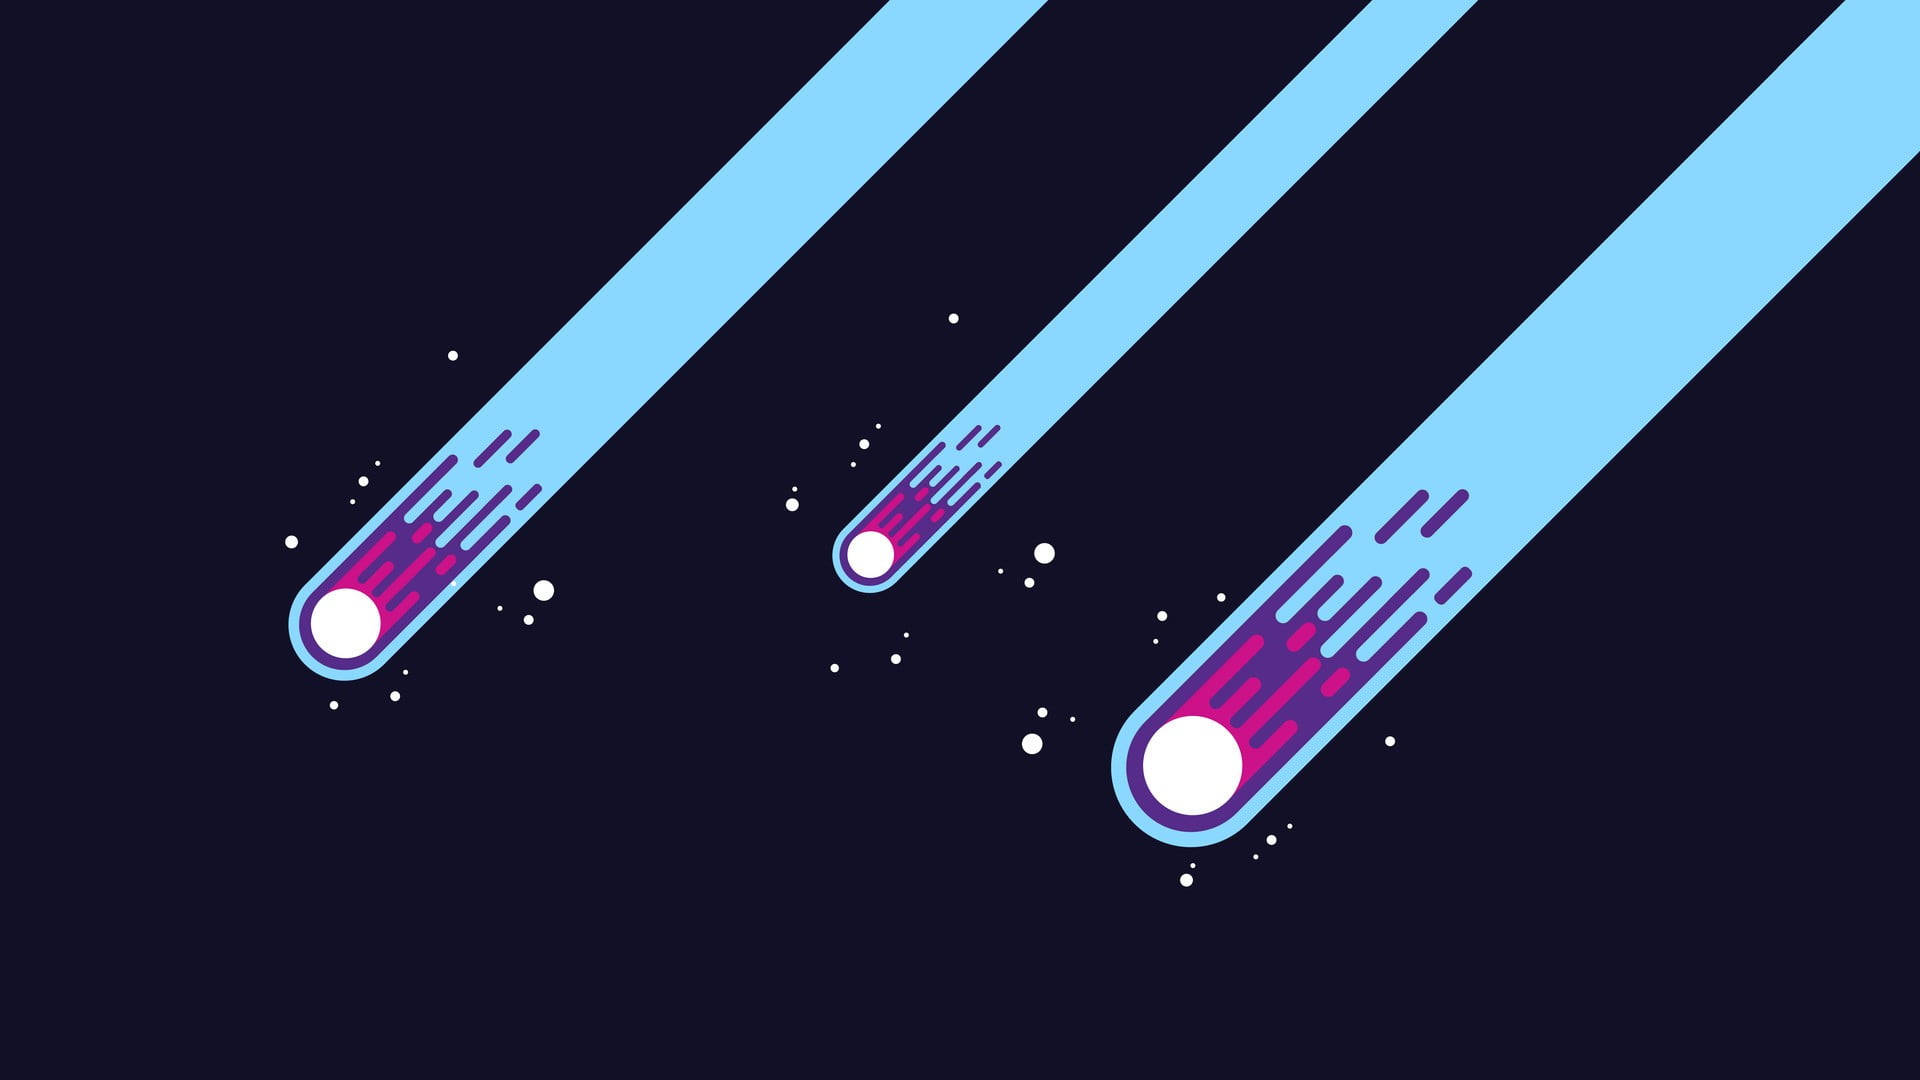 Watch Shooting Stars in Outer Space on this Dynamic Design Wallpaper